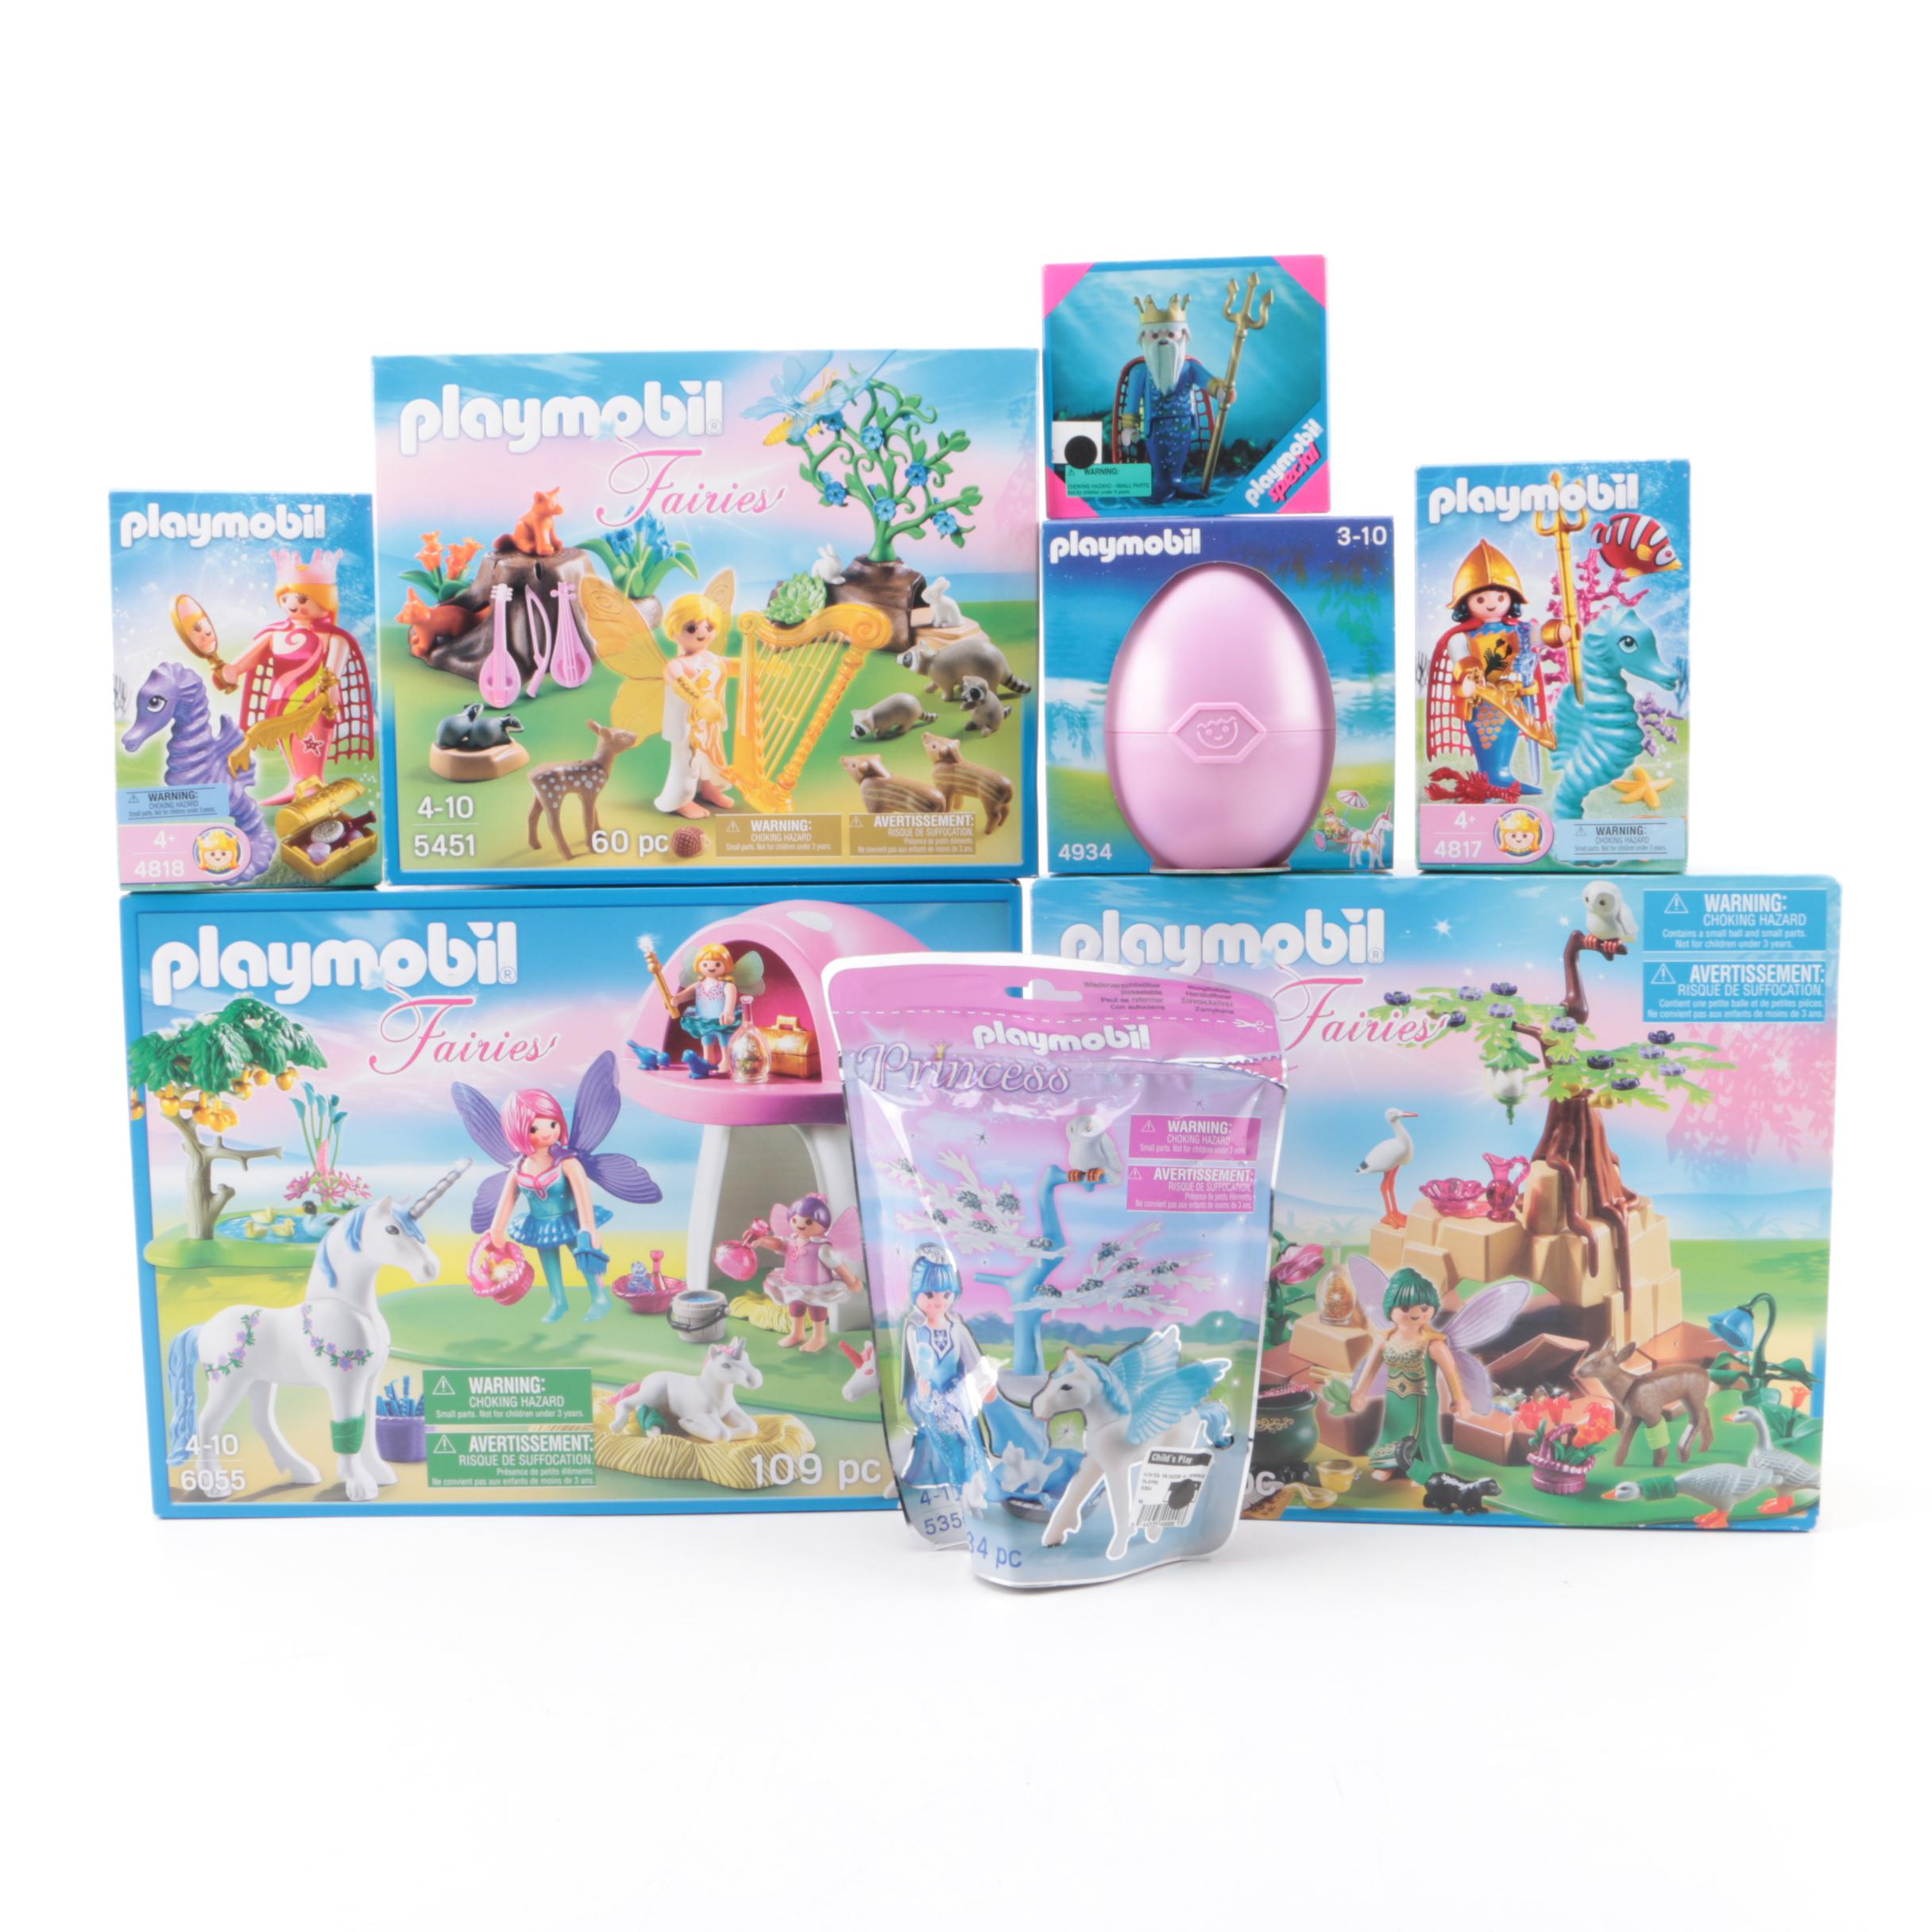 playsets and figures